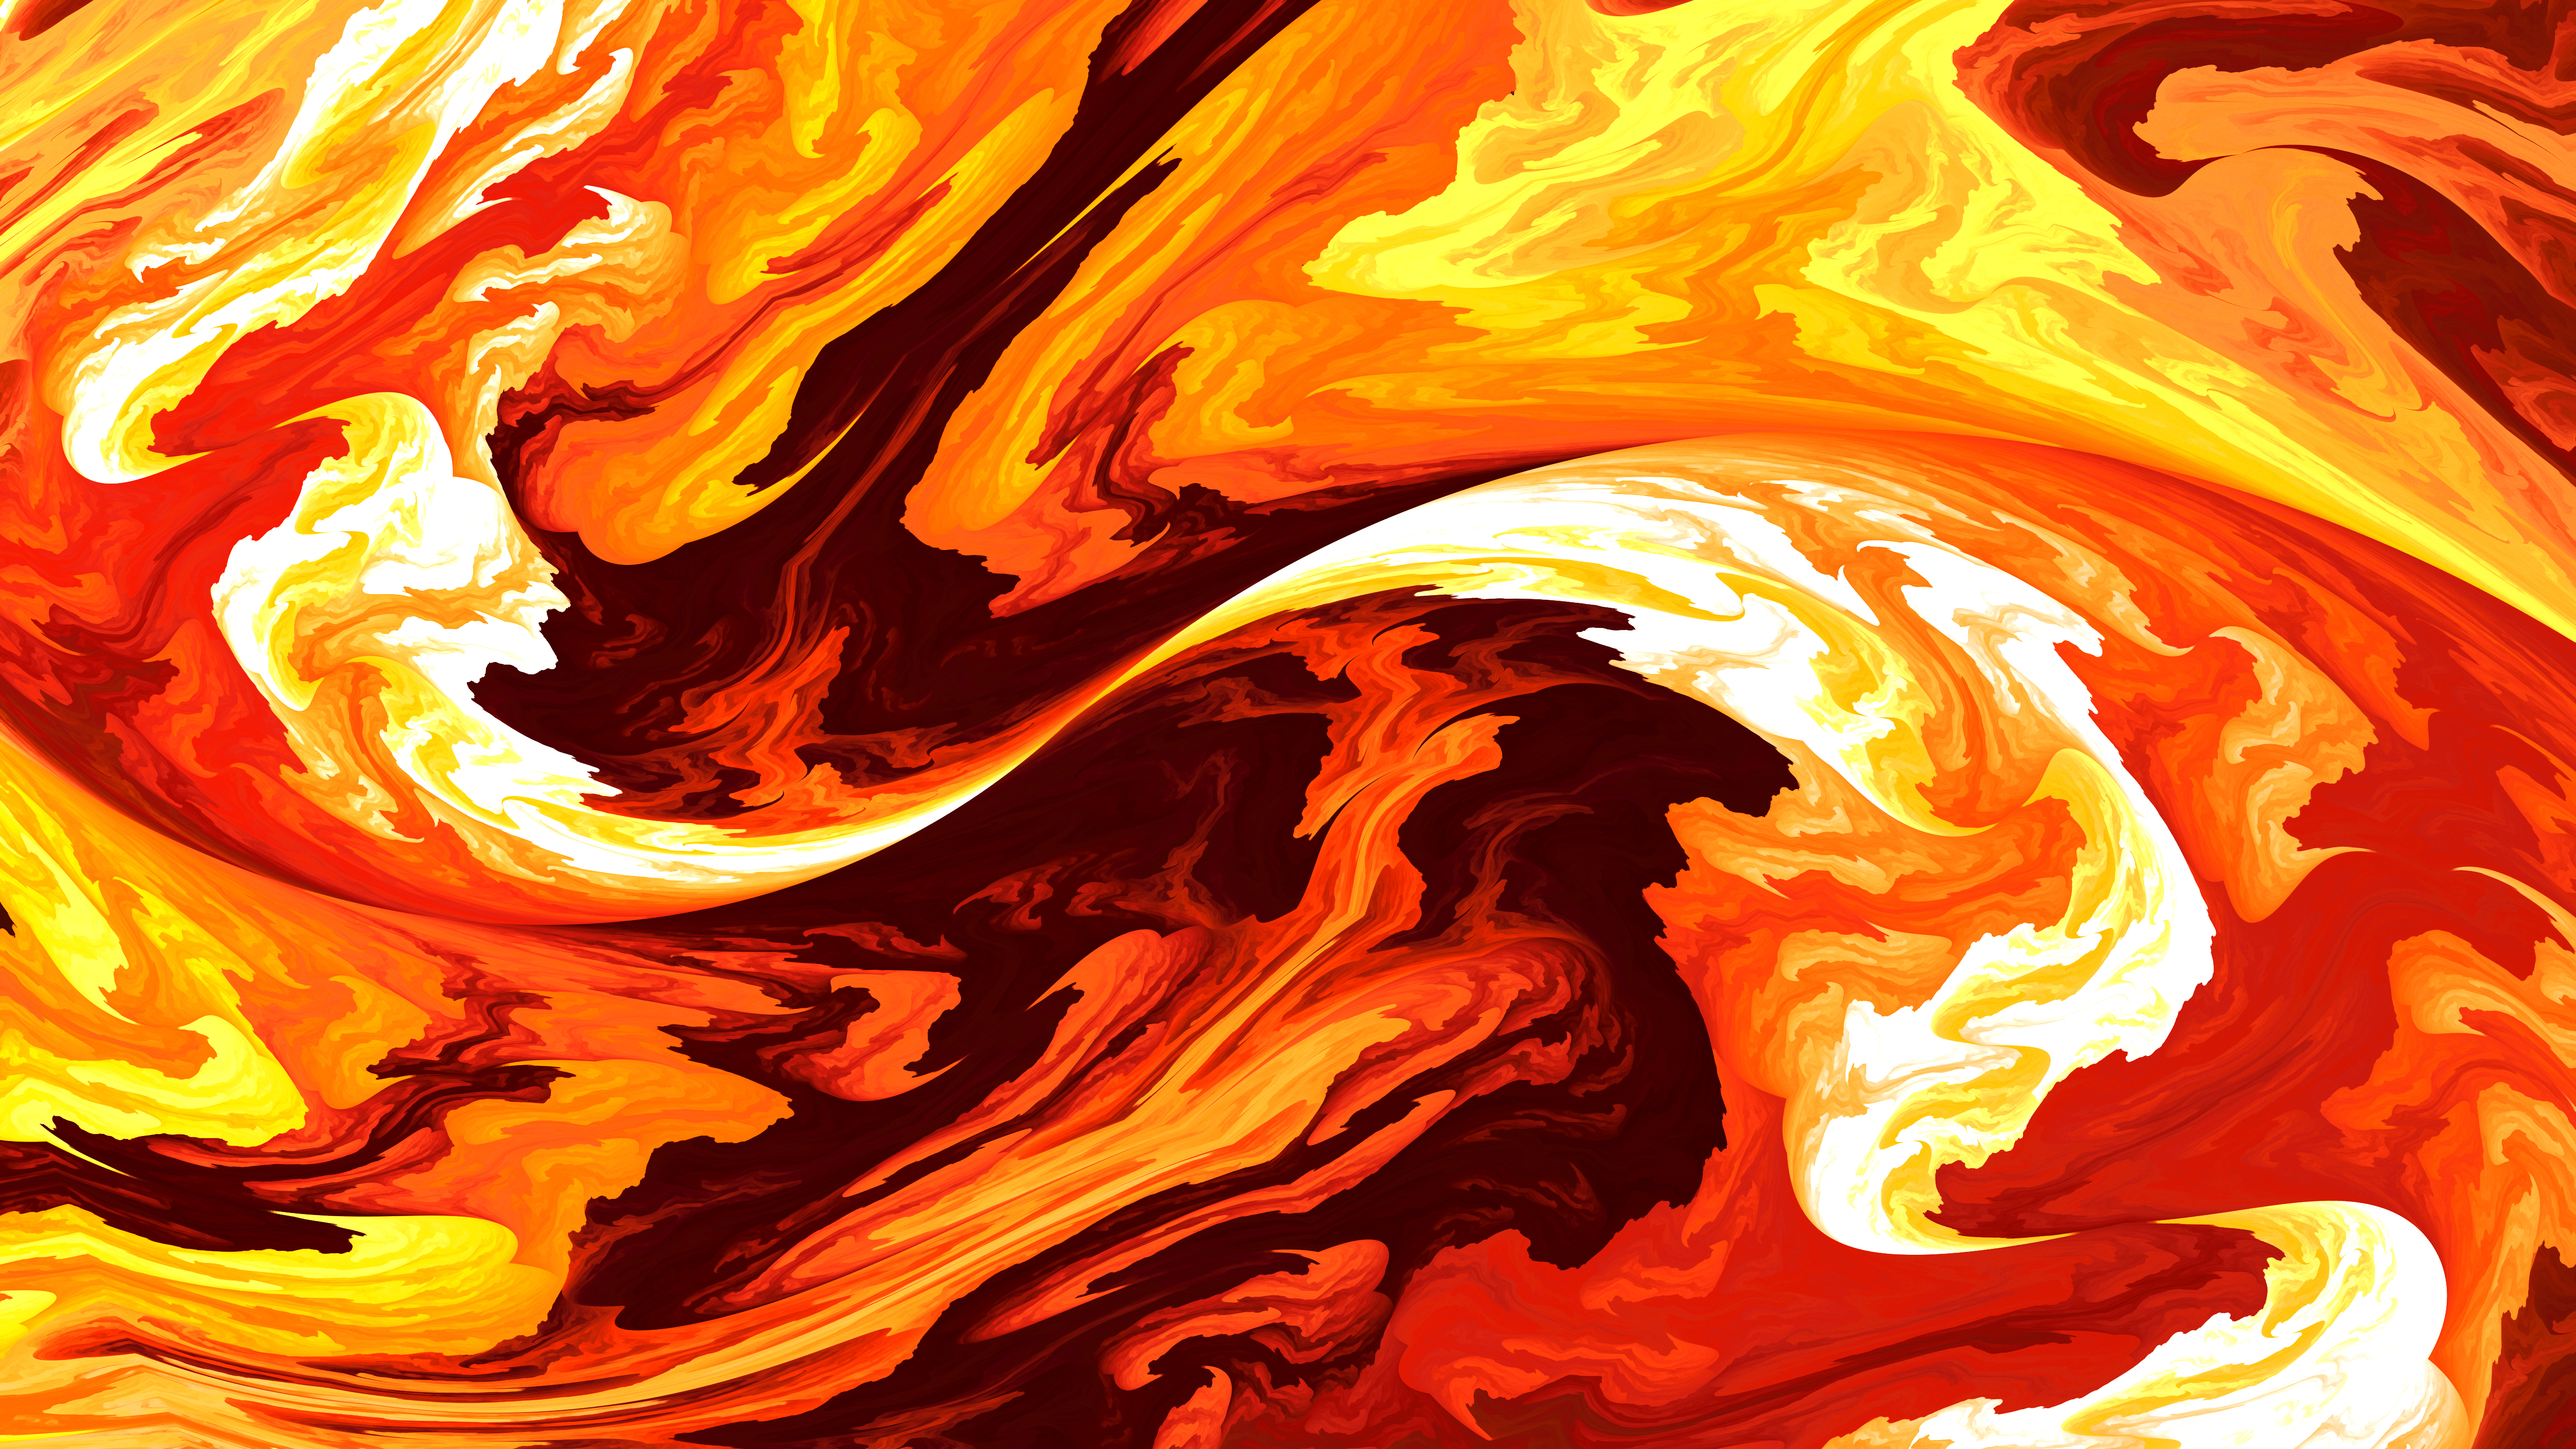 stains, abstract, fractal, spots, flaming, fiery